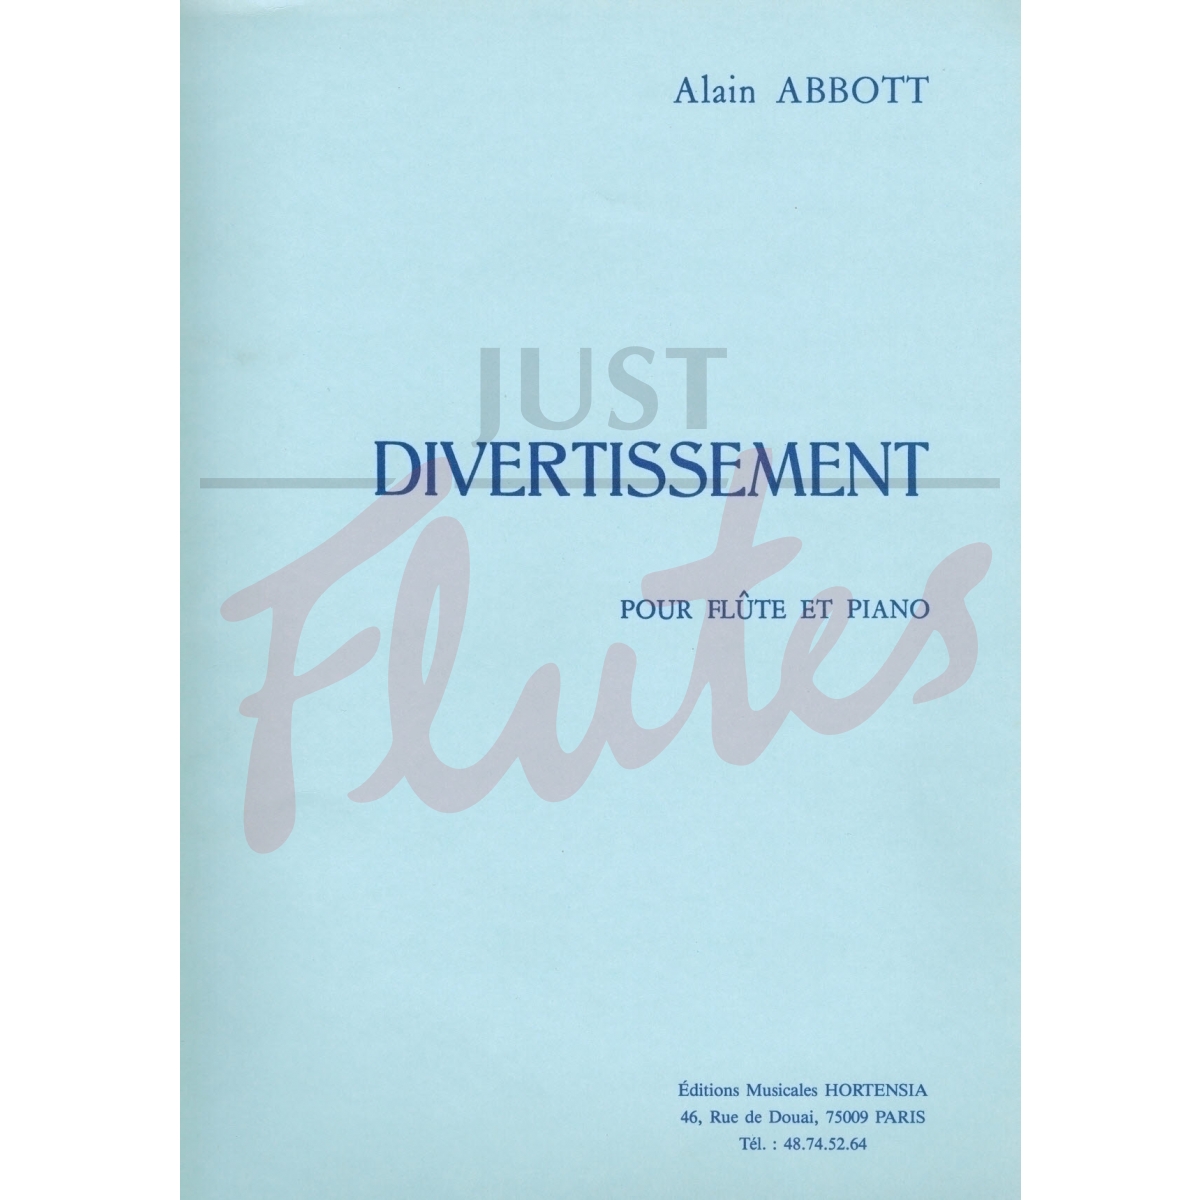 Divertissement for Flute and Piano